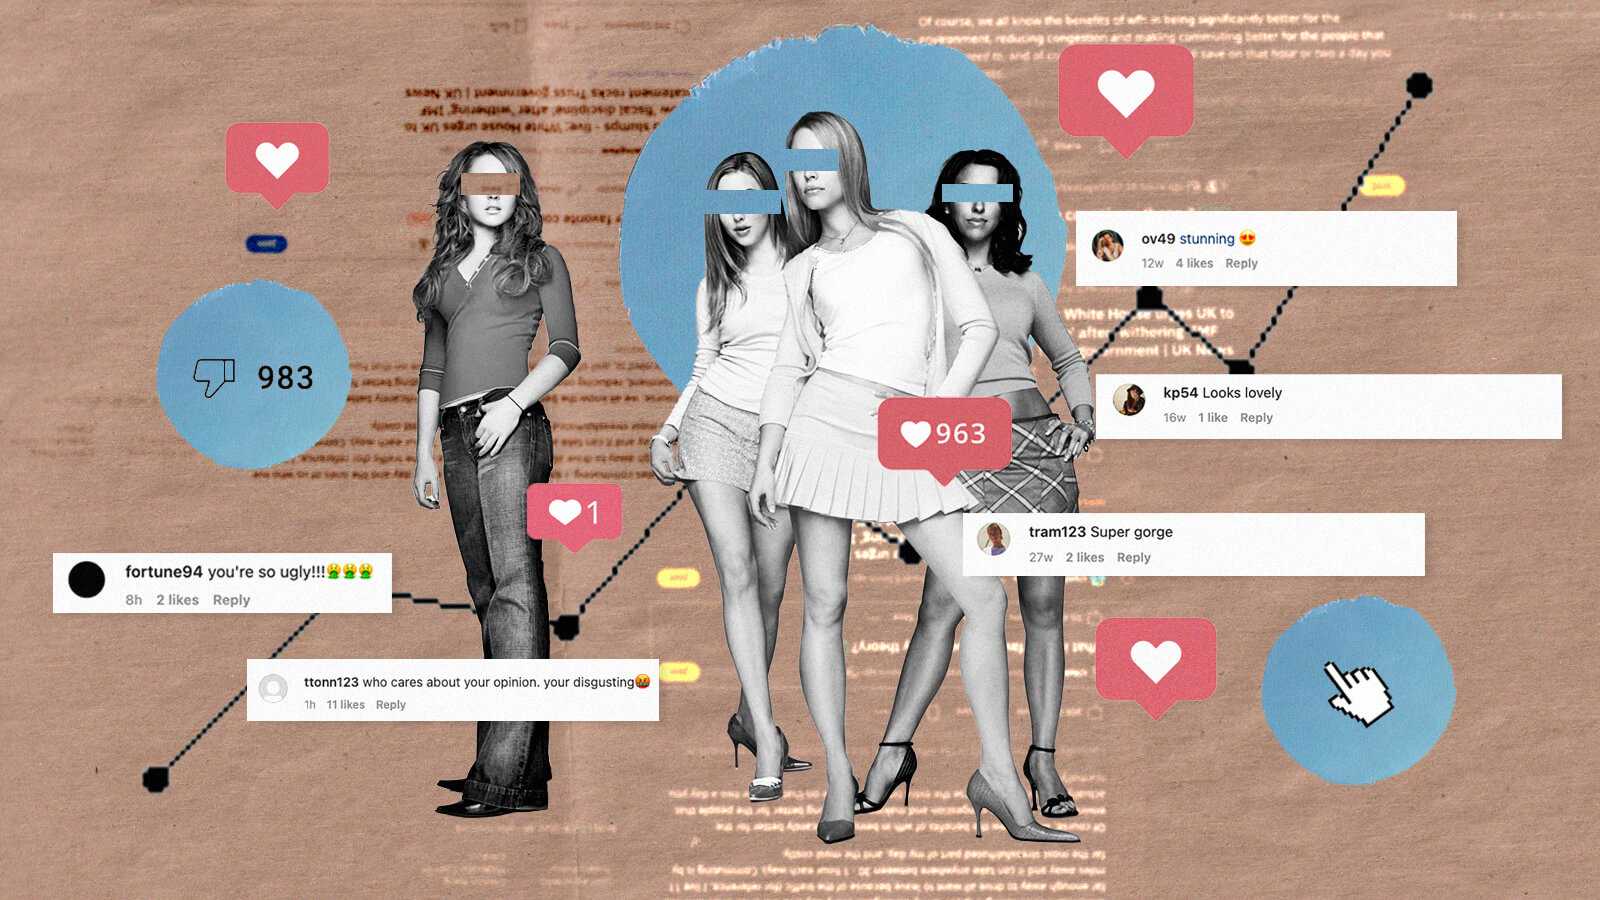 Collage image featuring internet and social media notifications and characters from Mean Girls alongside negative and positive comments